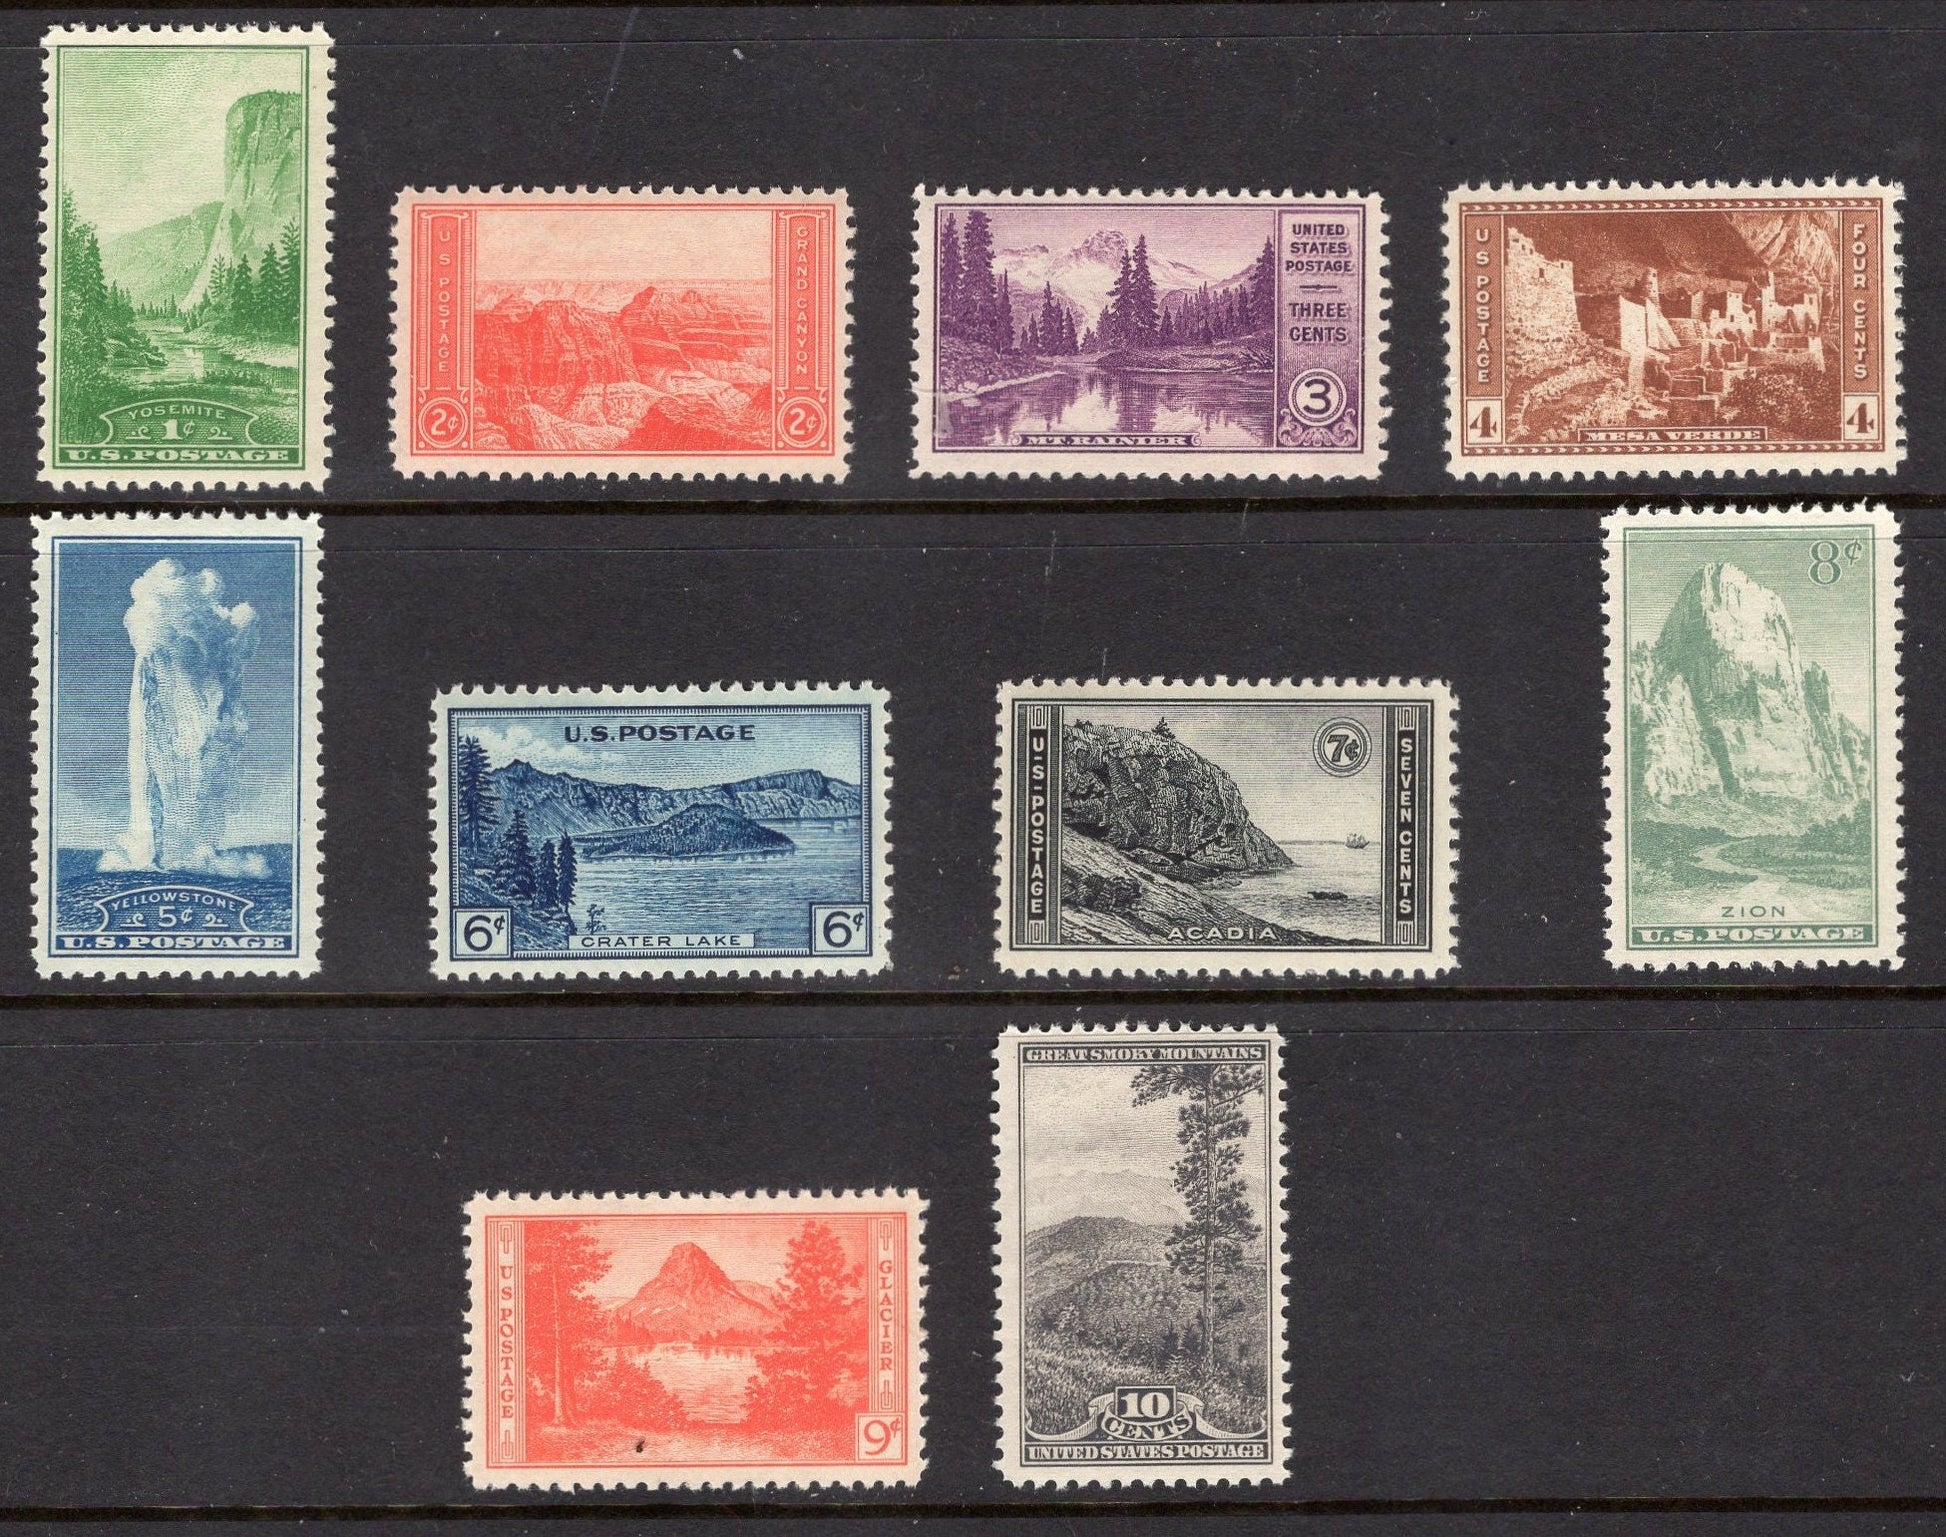 10 NATIONAL PARKS Stamps Yosemite Grand Canyon Rainier Yellowstone Glacier Bright, Fresh - Issued in 1934 s740 -